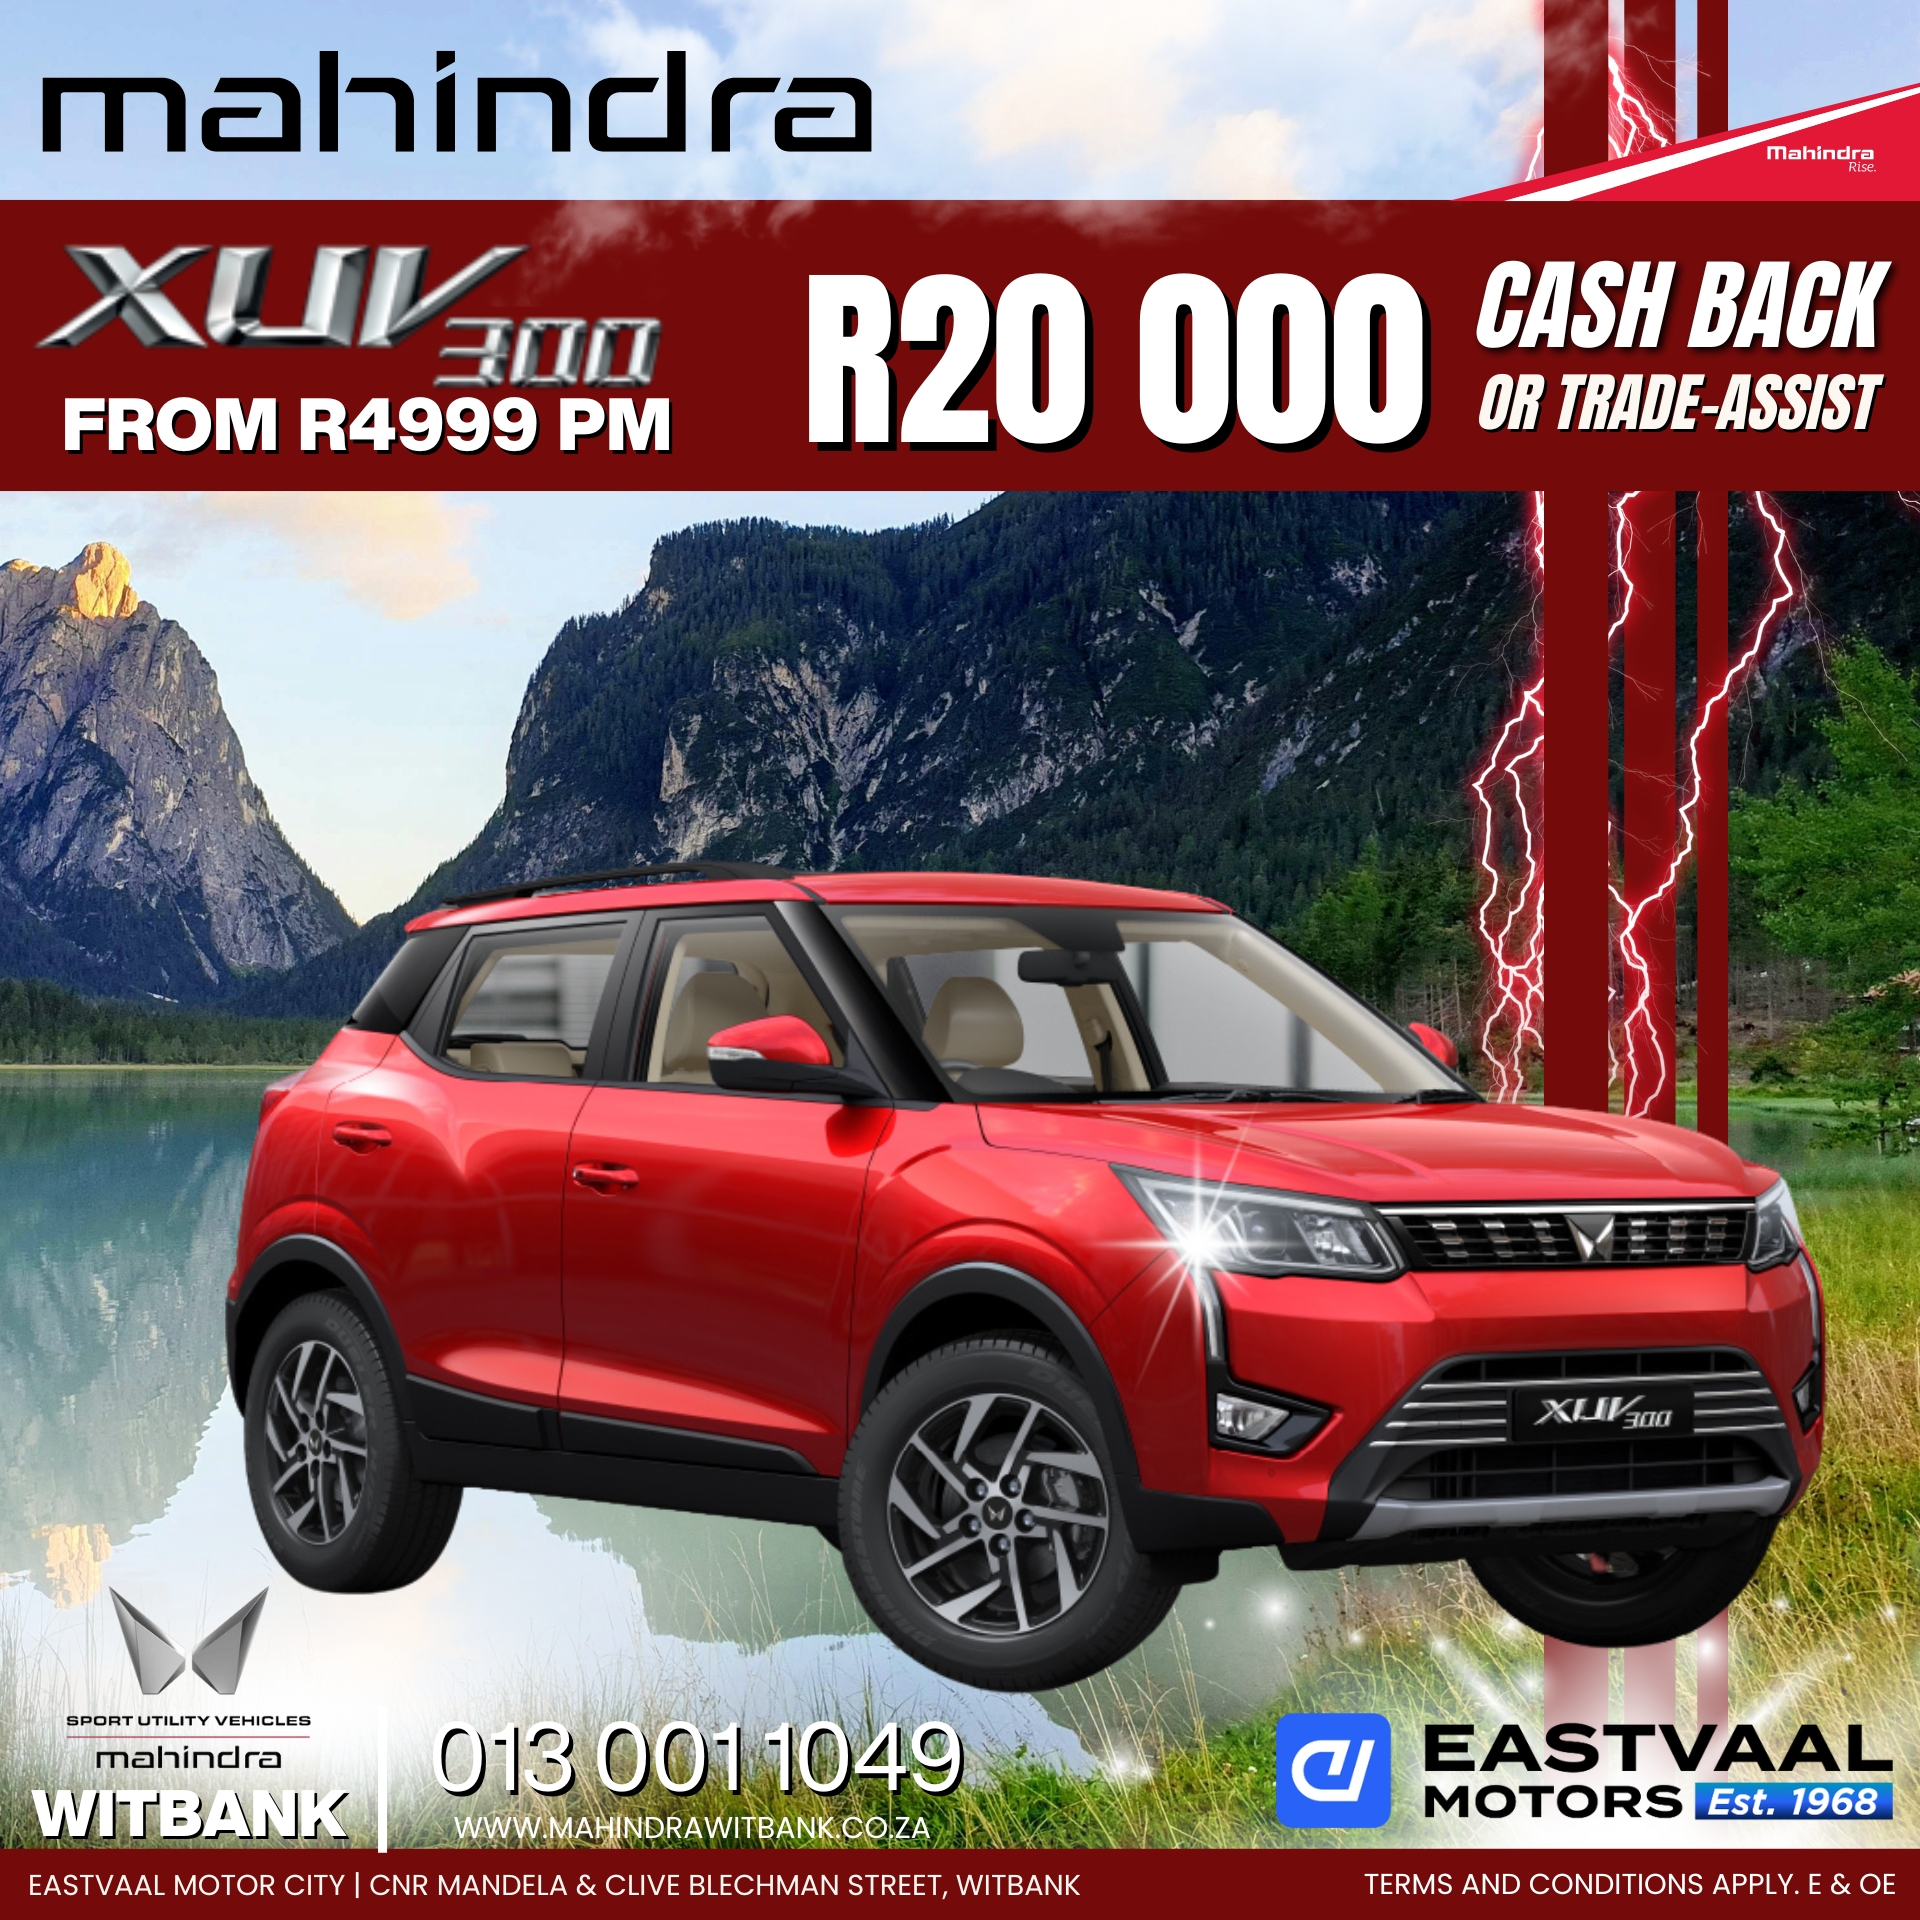 Drive into July with unbeatable deals on Mahindra vehicles at Eastvaal Motor City! image from Eastvaal Motors